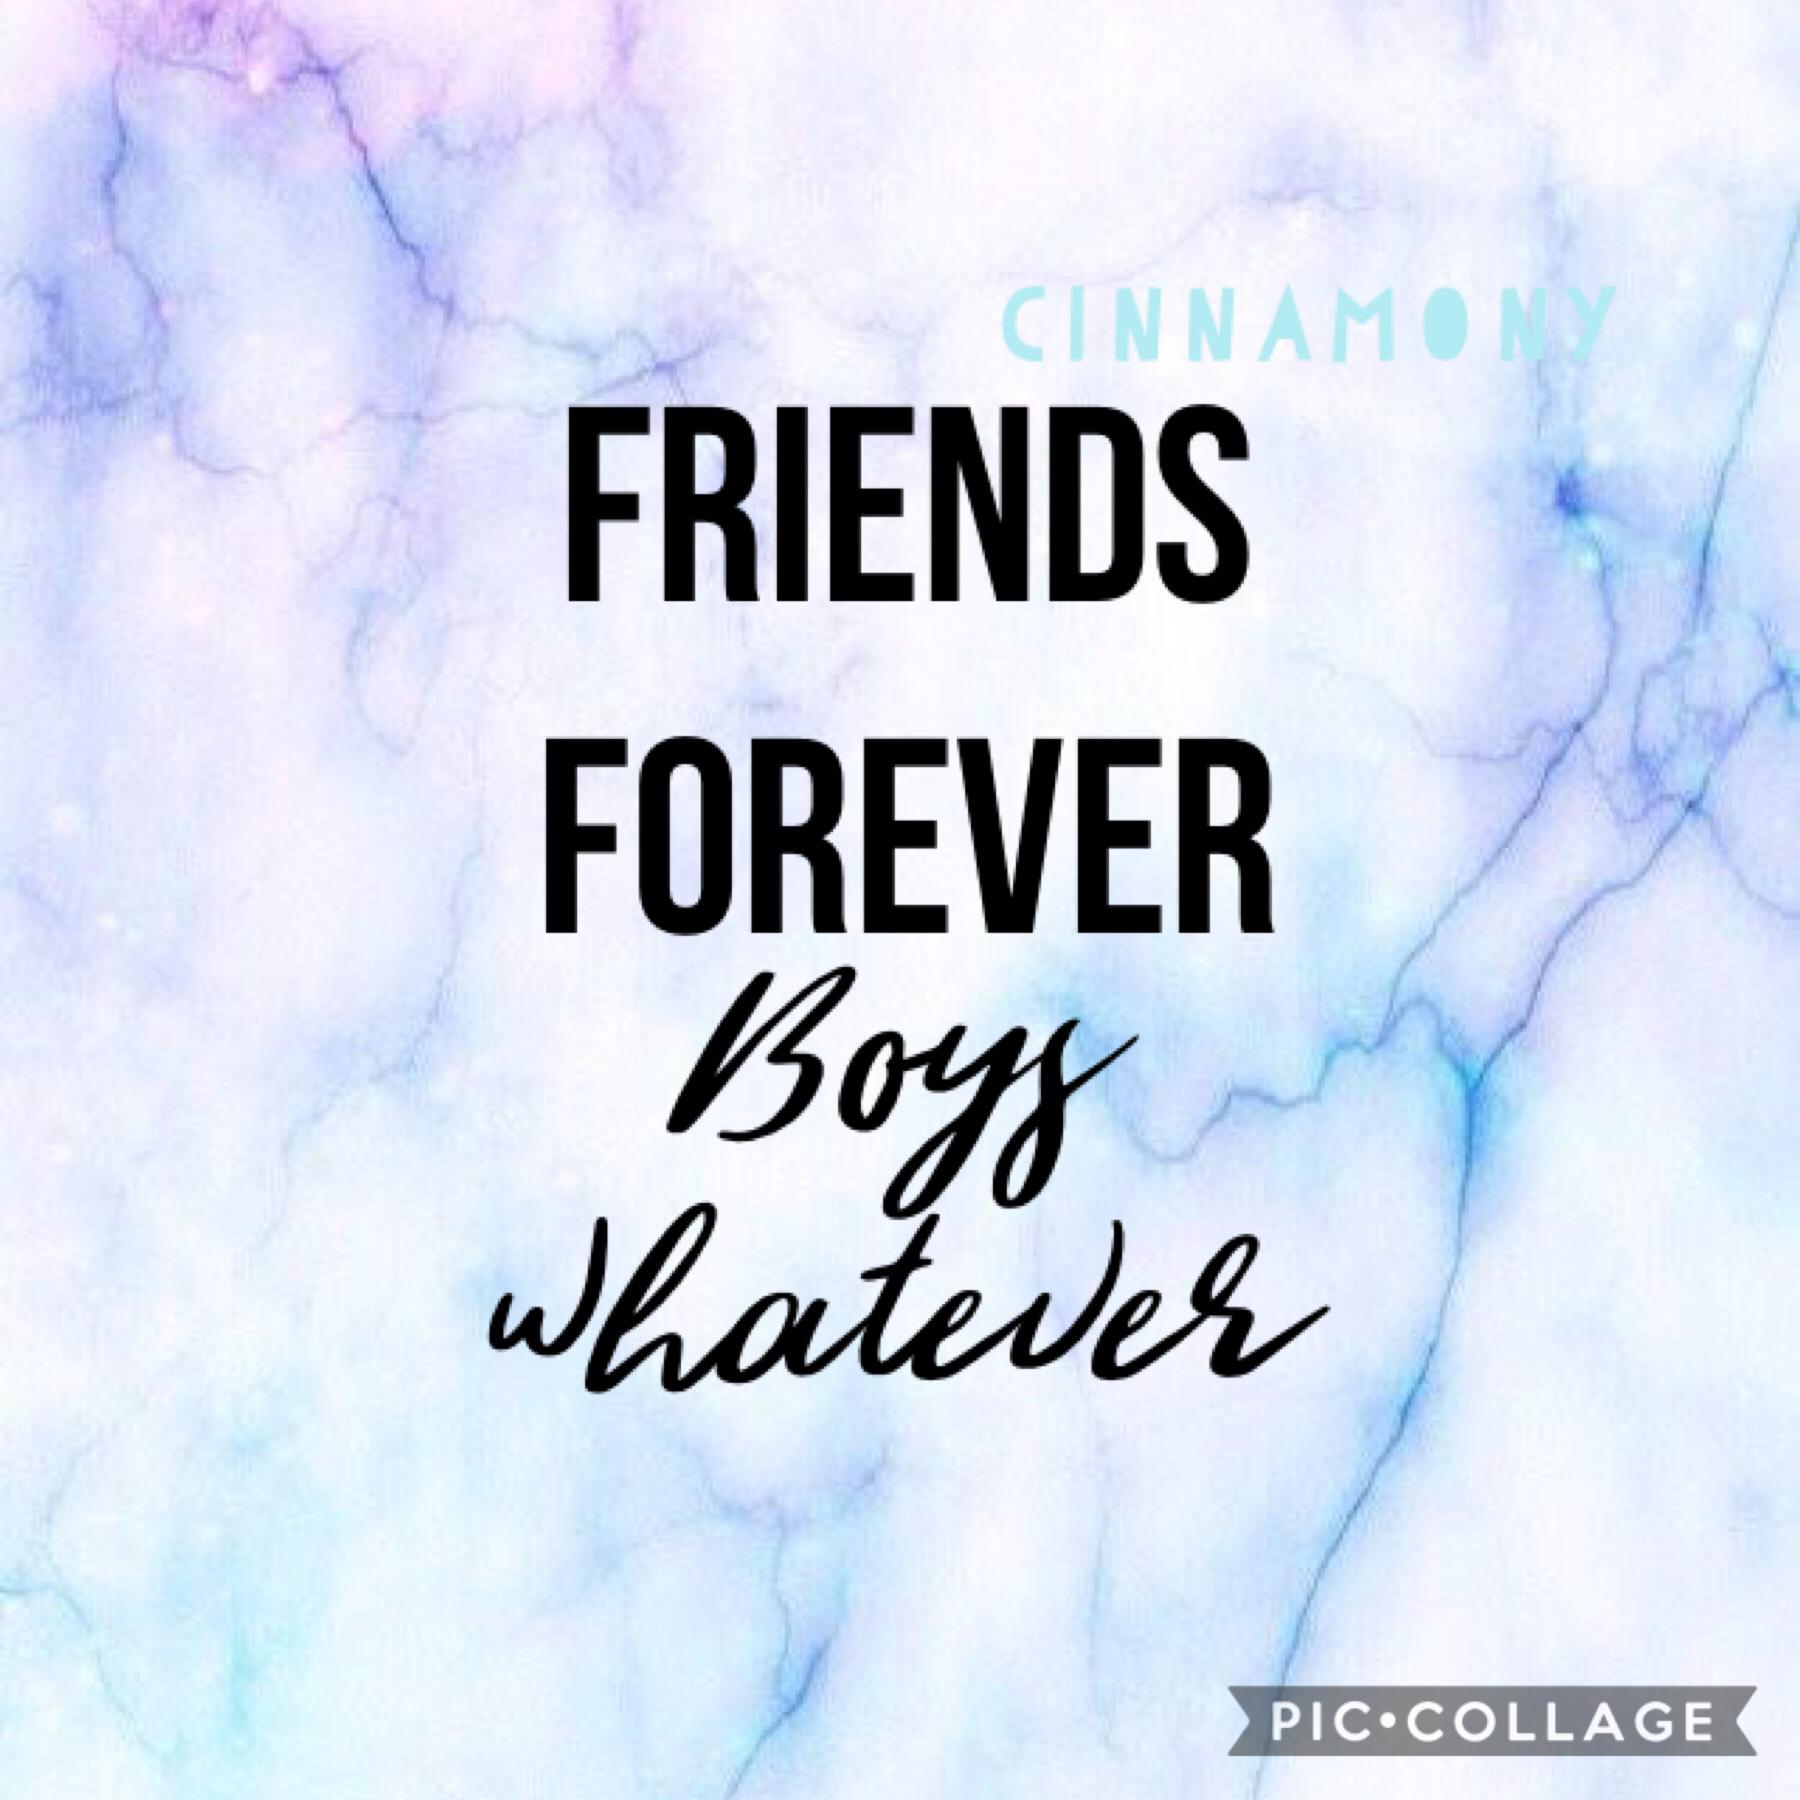 👯‍♂️Friends forever👯‍♀️
🙅🏼‍♂️Boys whatever🙅🏼‍♂️